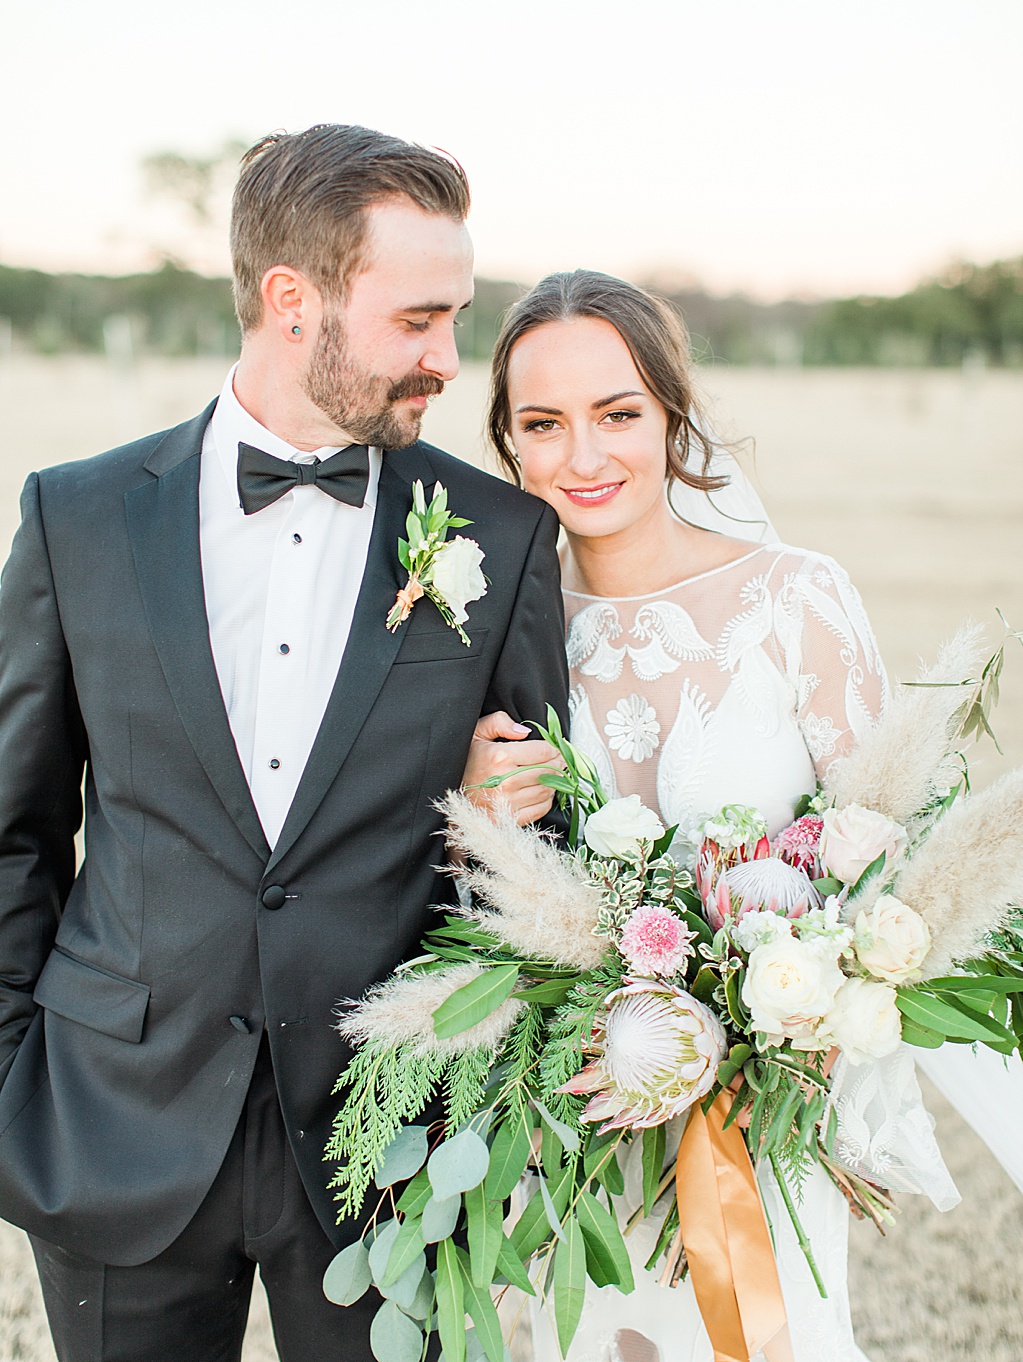 Hill Country Wedding at Turtle Creek Olive Grove wedding venue in Kerrville Texas by Wedding Photographer Allison Jeffers 0106